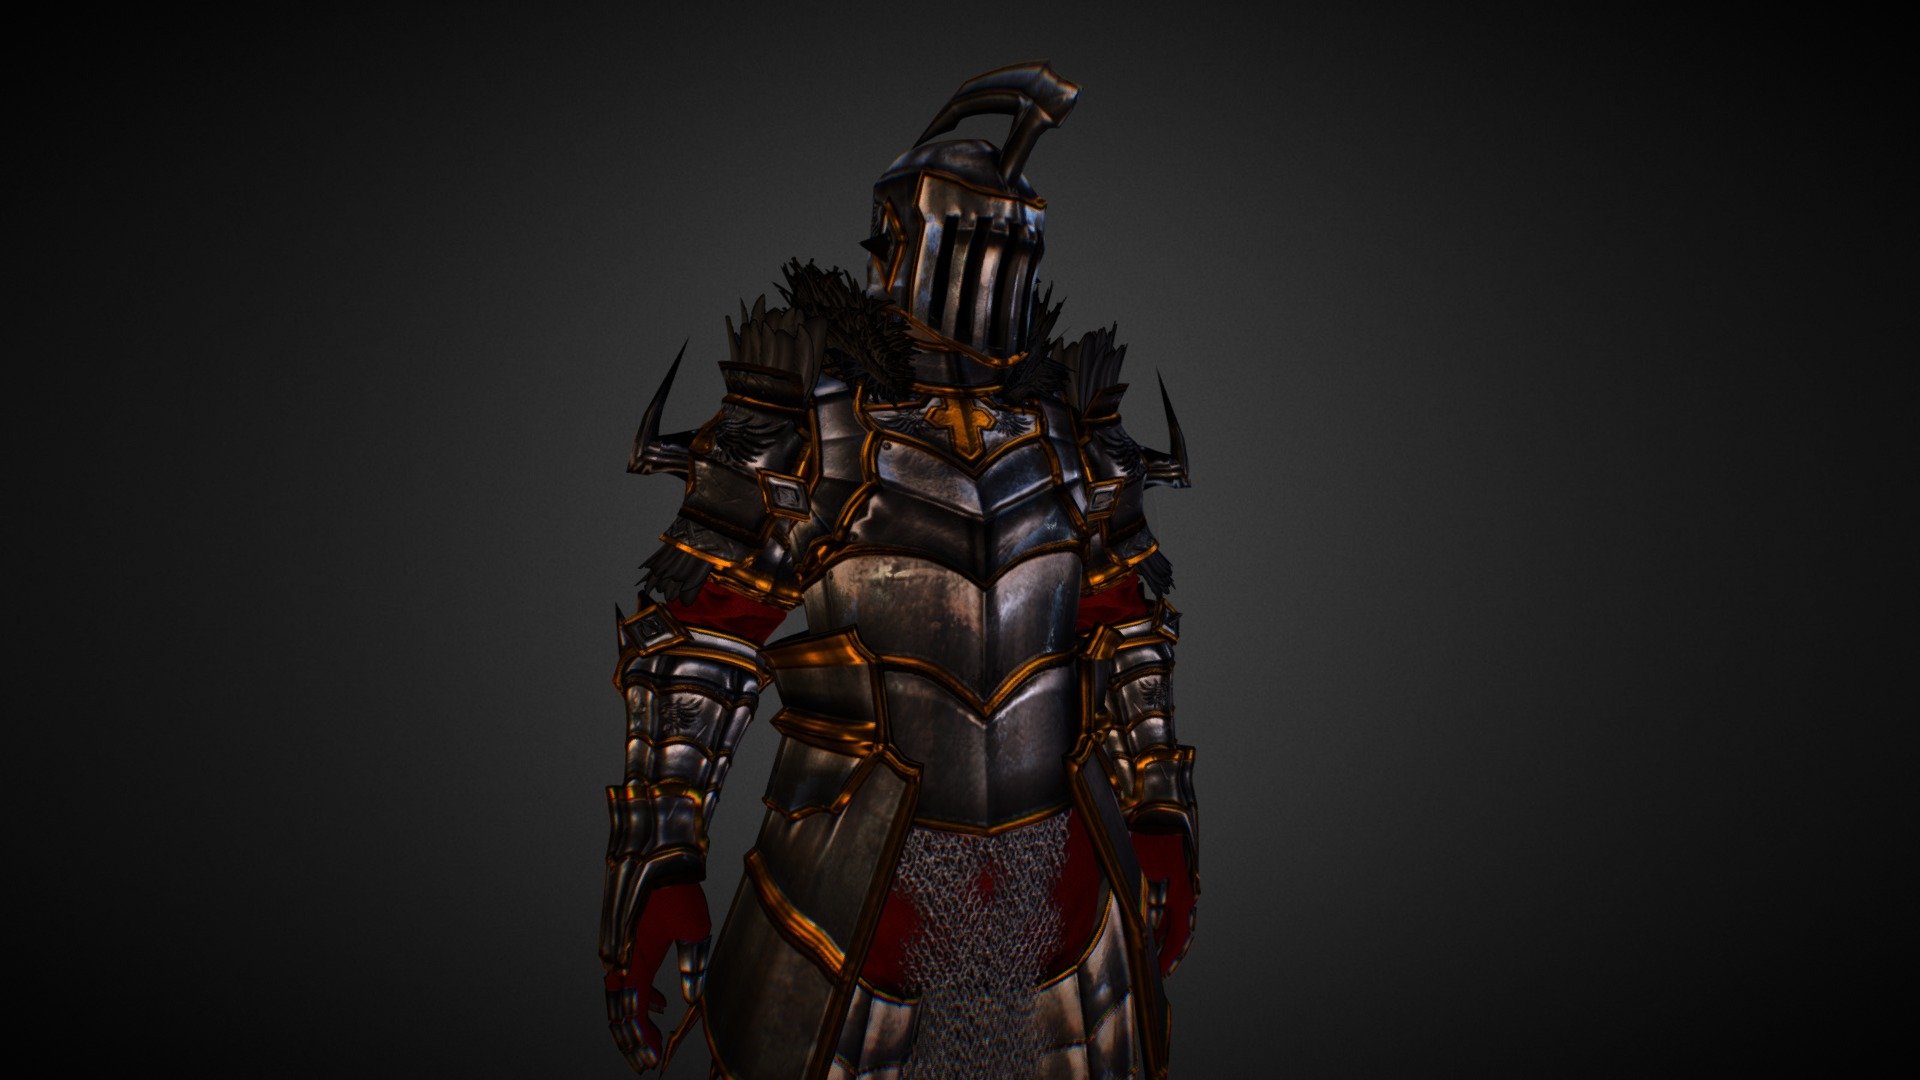 This is a past project of mine (about 3 months ago). I went for a Korean MMORPG style of armor, caring more about the looks than it's functionality.
I used many different MMORPGs and RPG games as references to make this 3d model